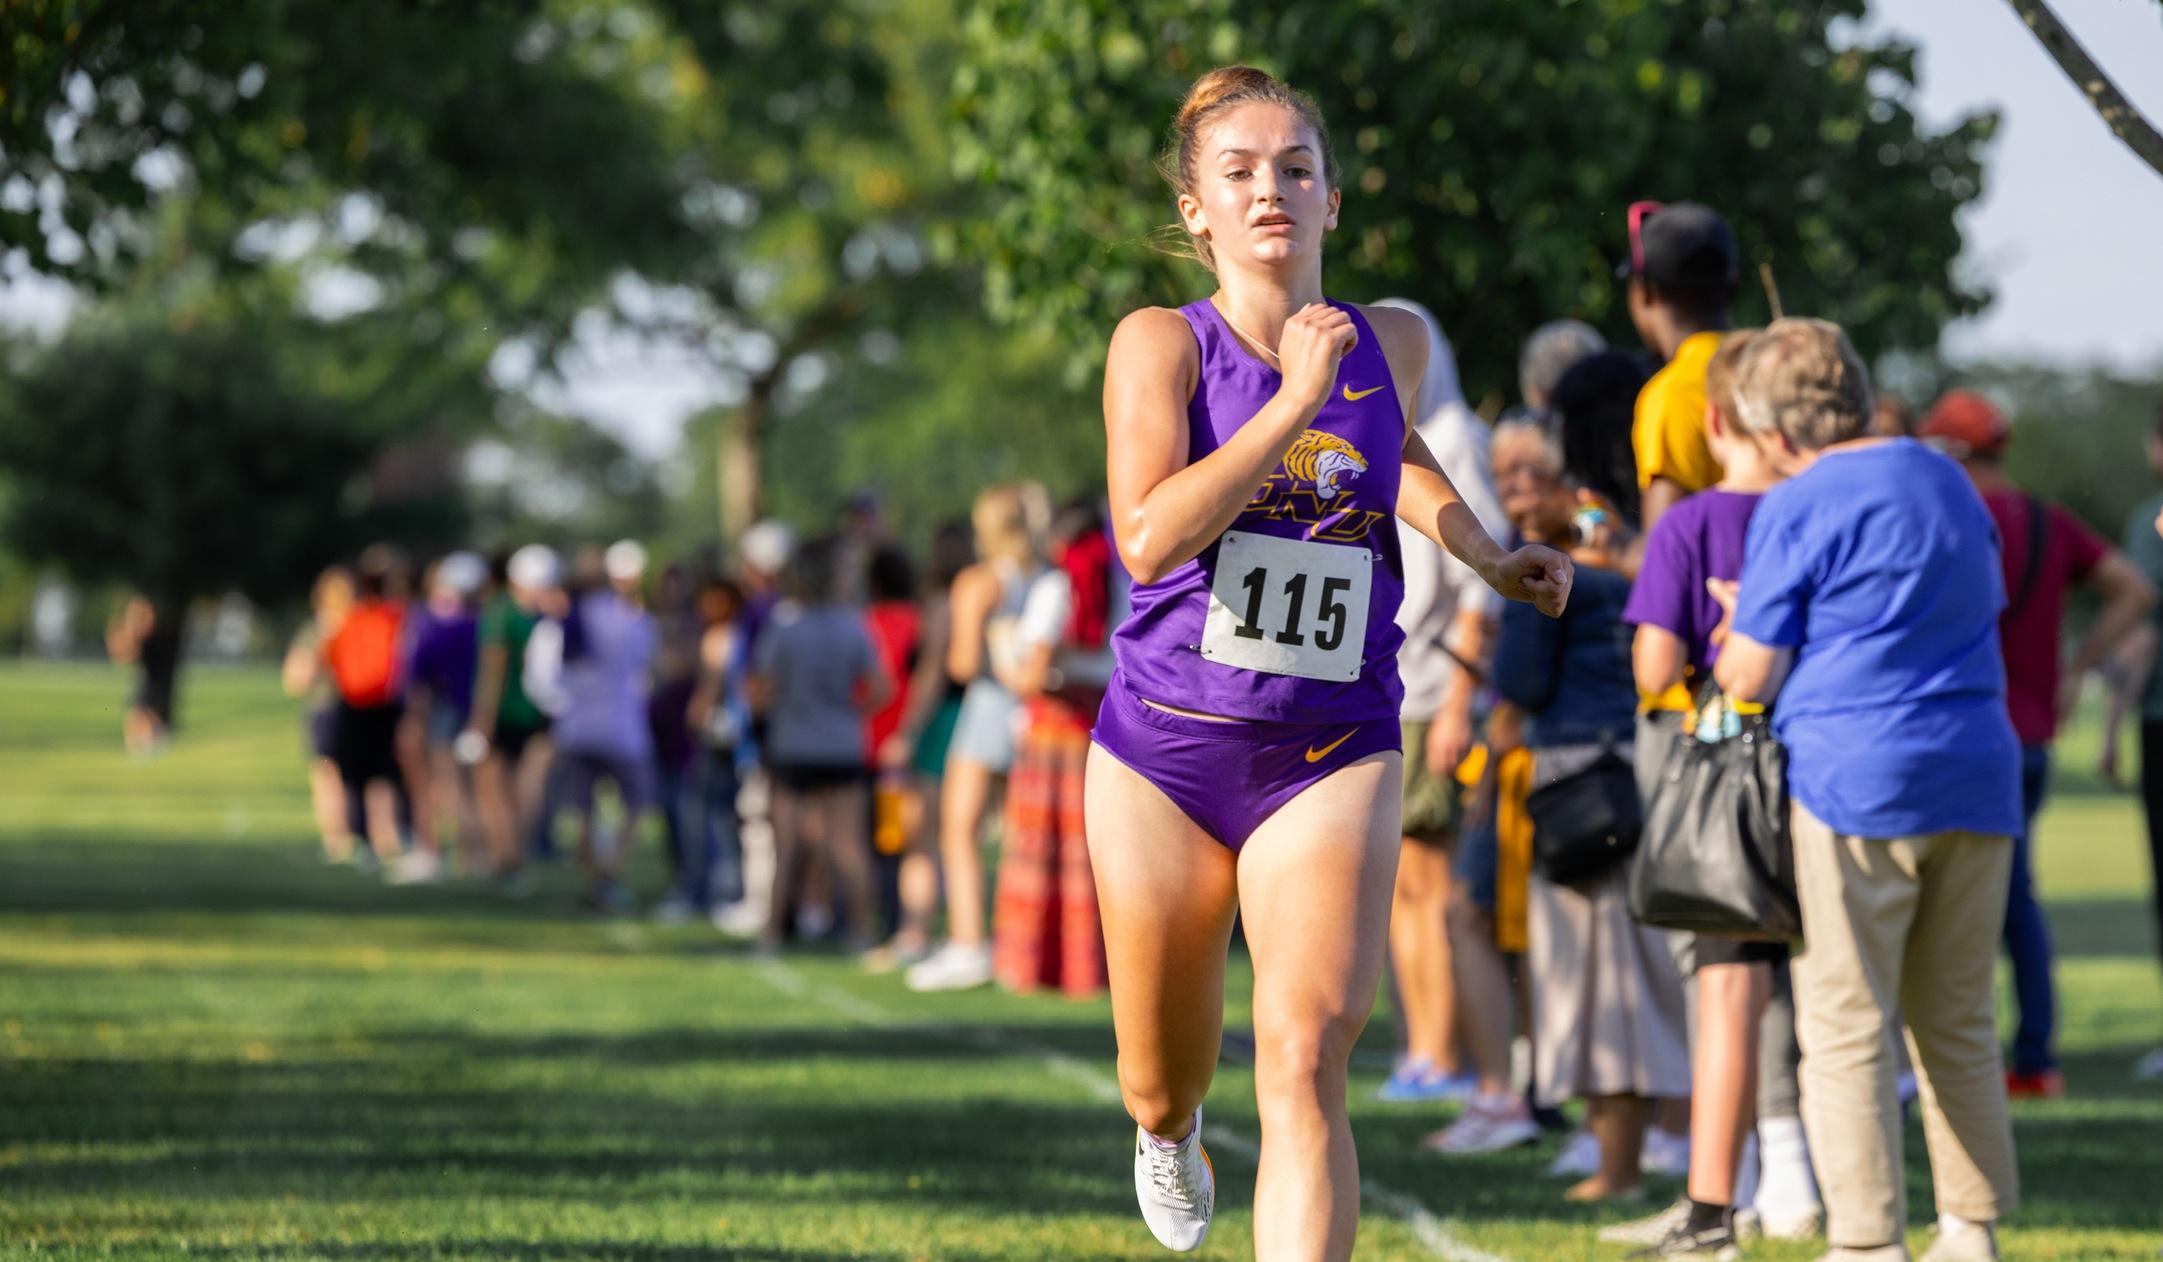 ONU WOMEN EARN 24TH-PLACE TEAM FINISH AT NAIA CHAMPIONSHIPS